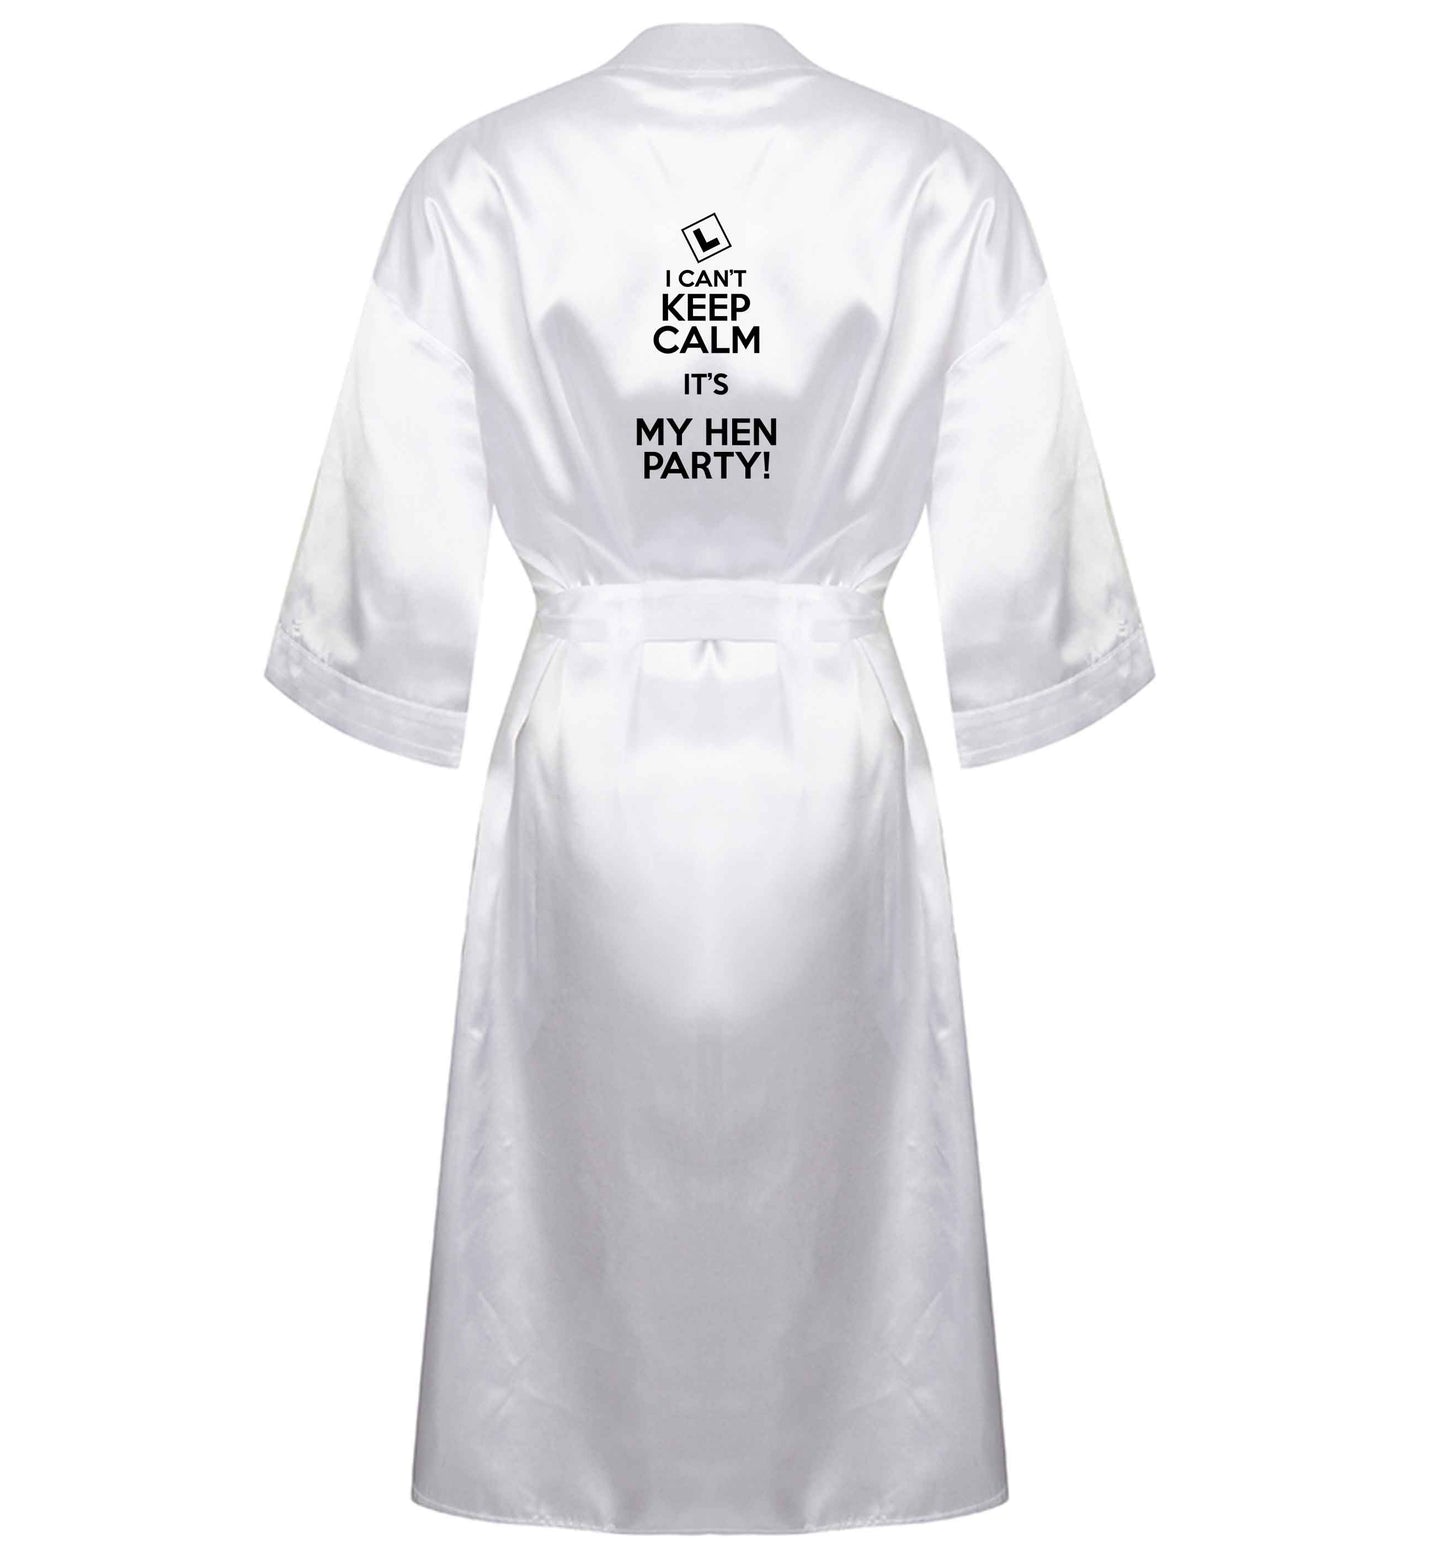 I can't keep calm it's my hen party XL/XXL white ladies dressing gown size 16/18